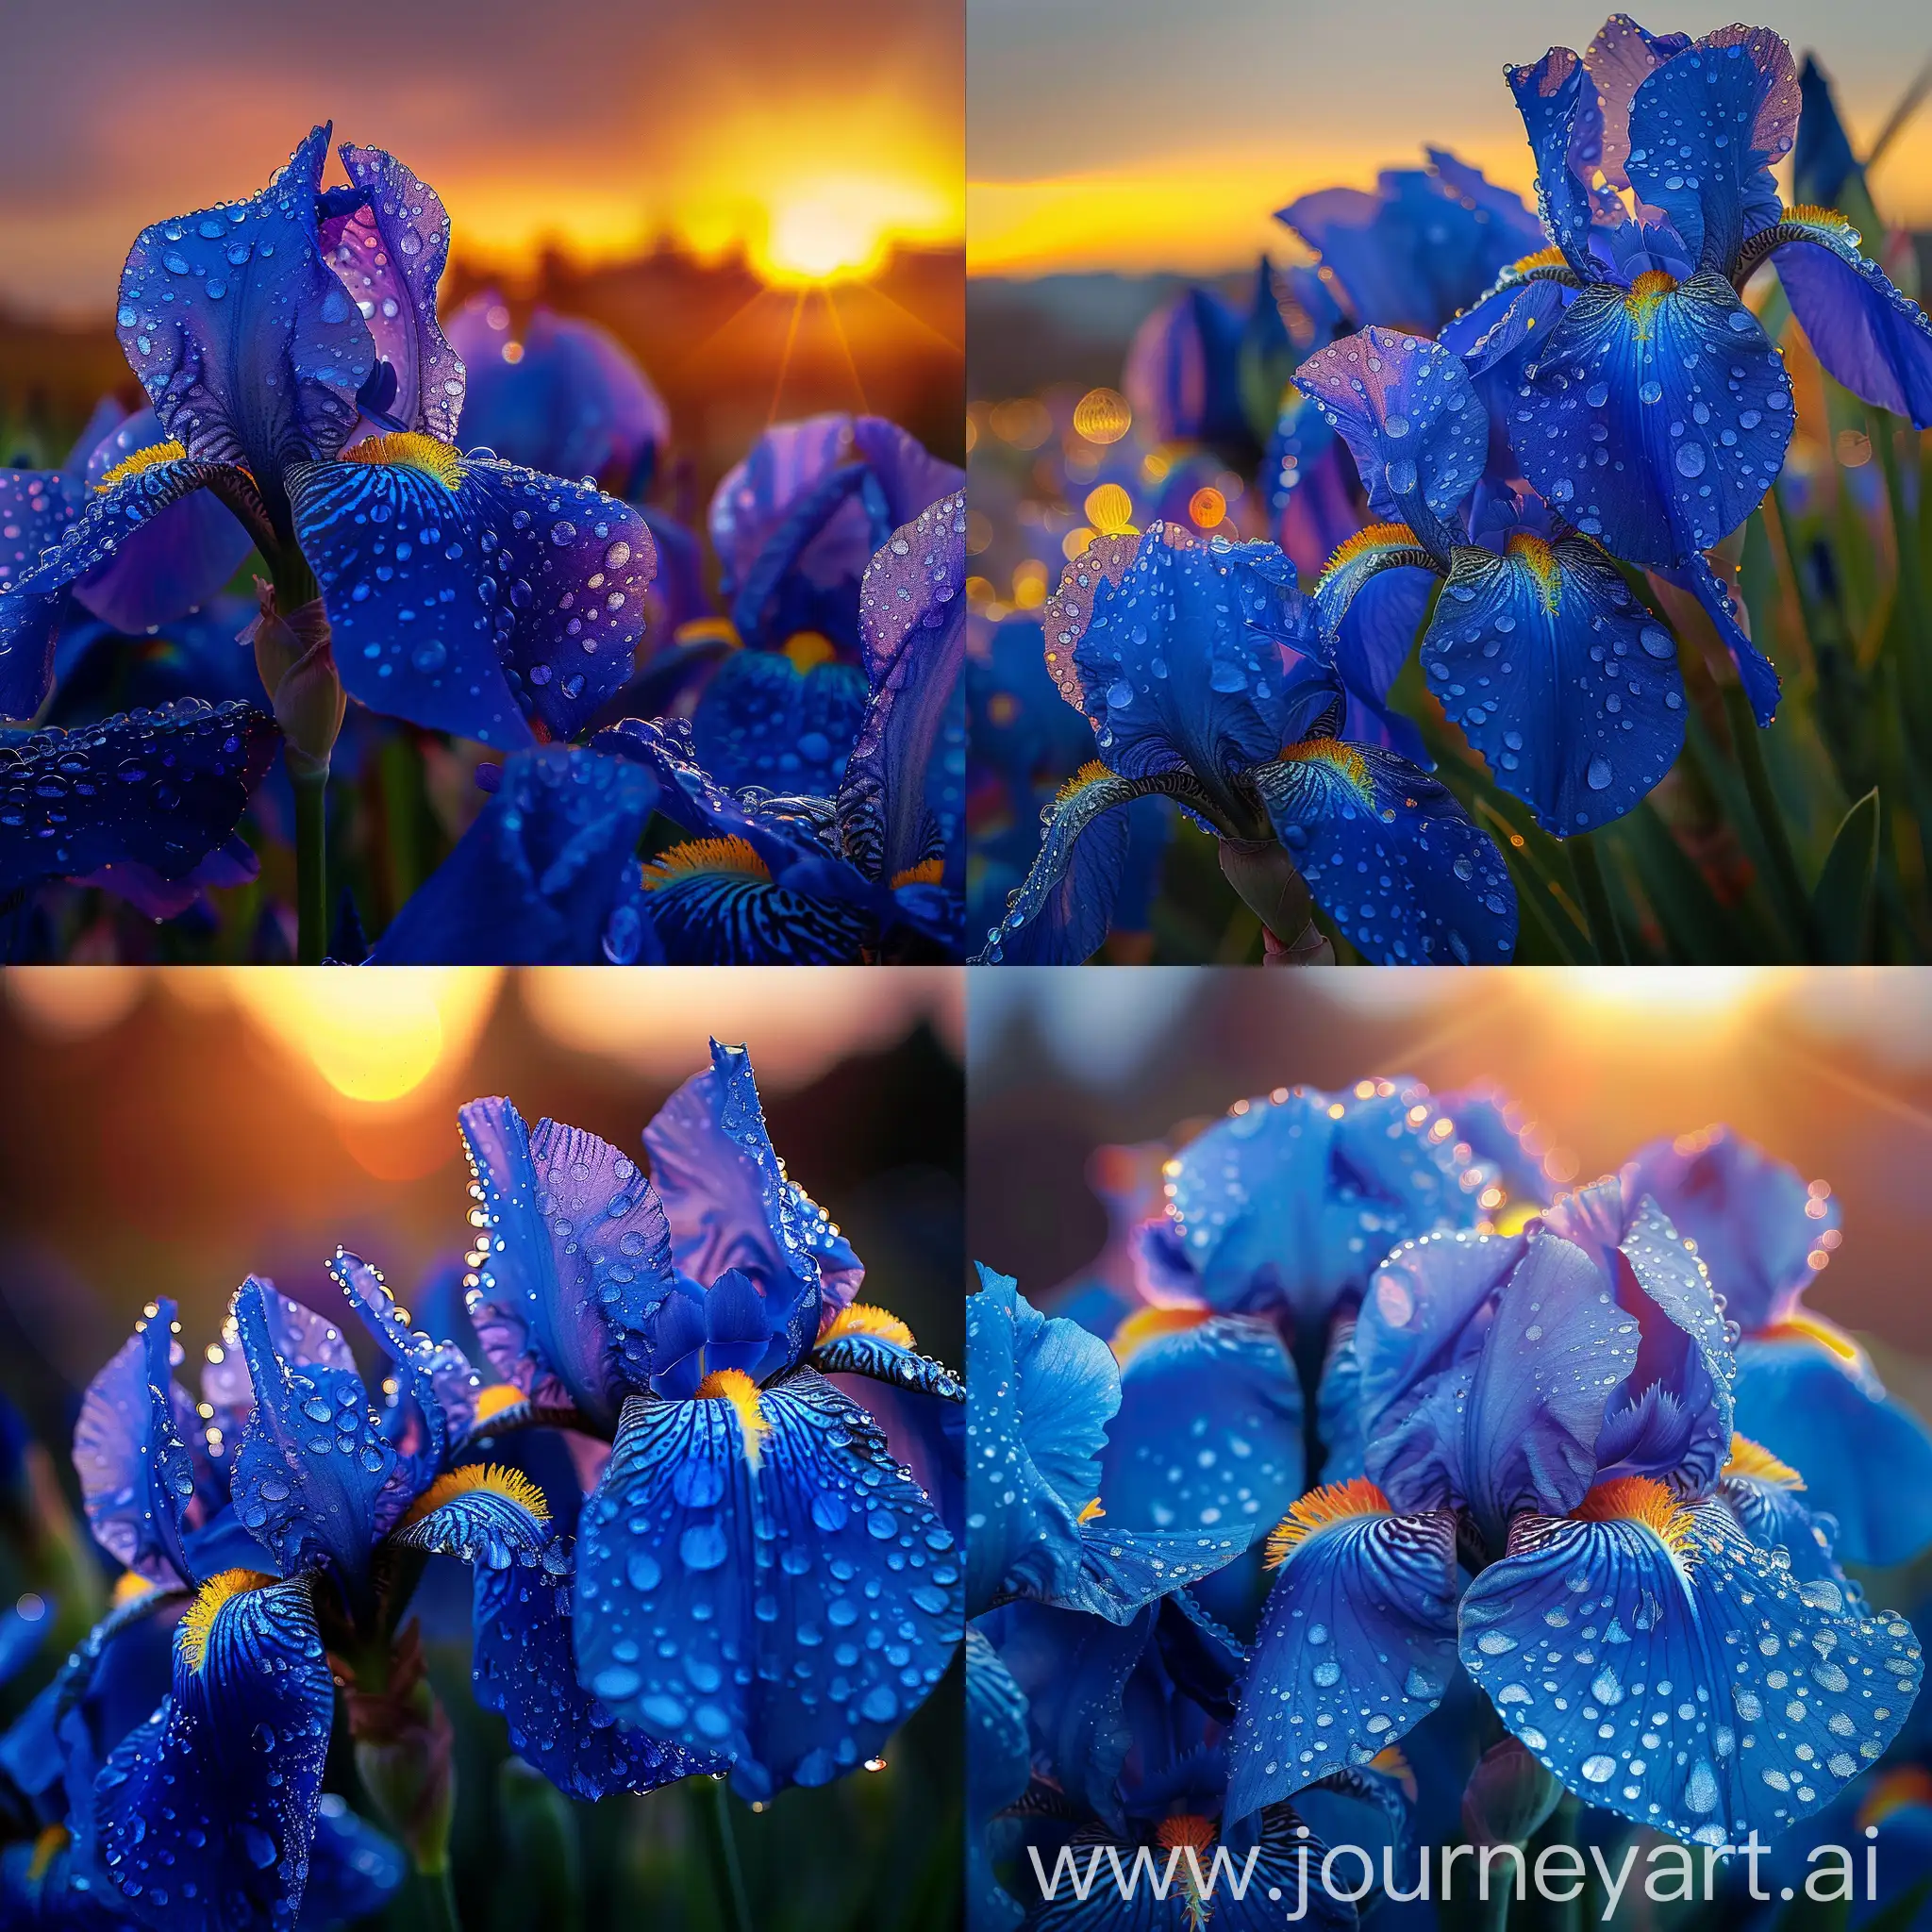 Fantasy-Sunrise-with-Blue-Irises-and-Dew-Drops